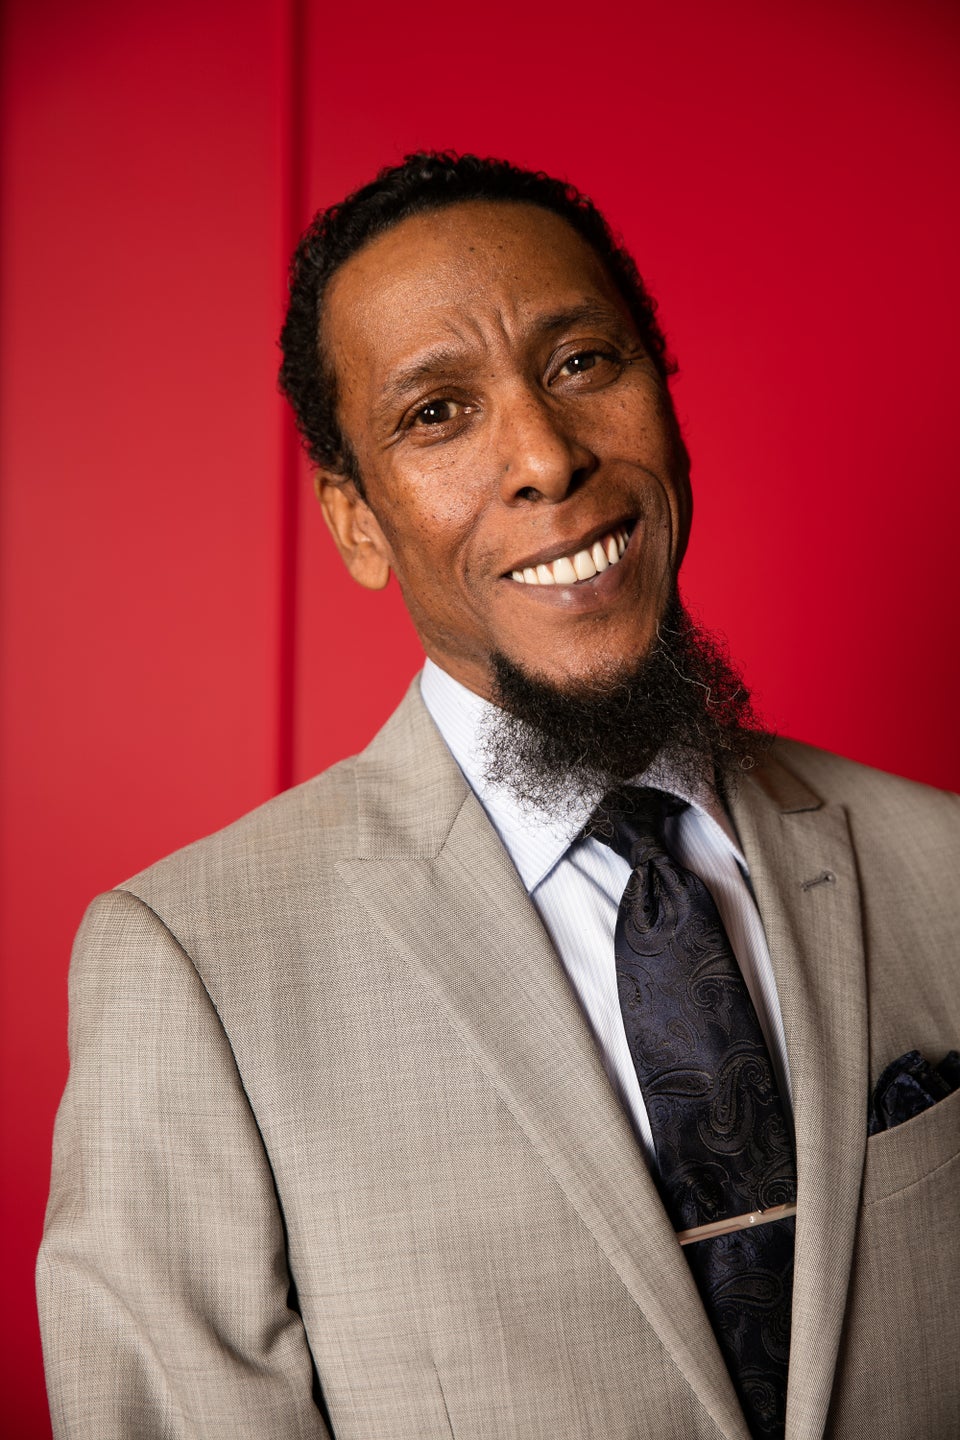 You’ll Never Guess Who Inspired ‘This Is Us’ Star Ron Cephas Jones’ Onscreen Performance